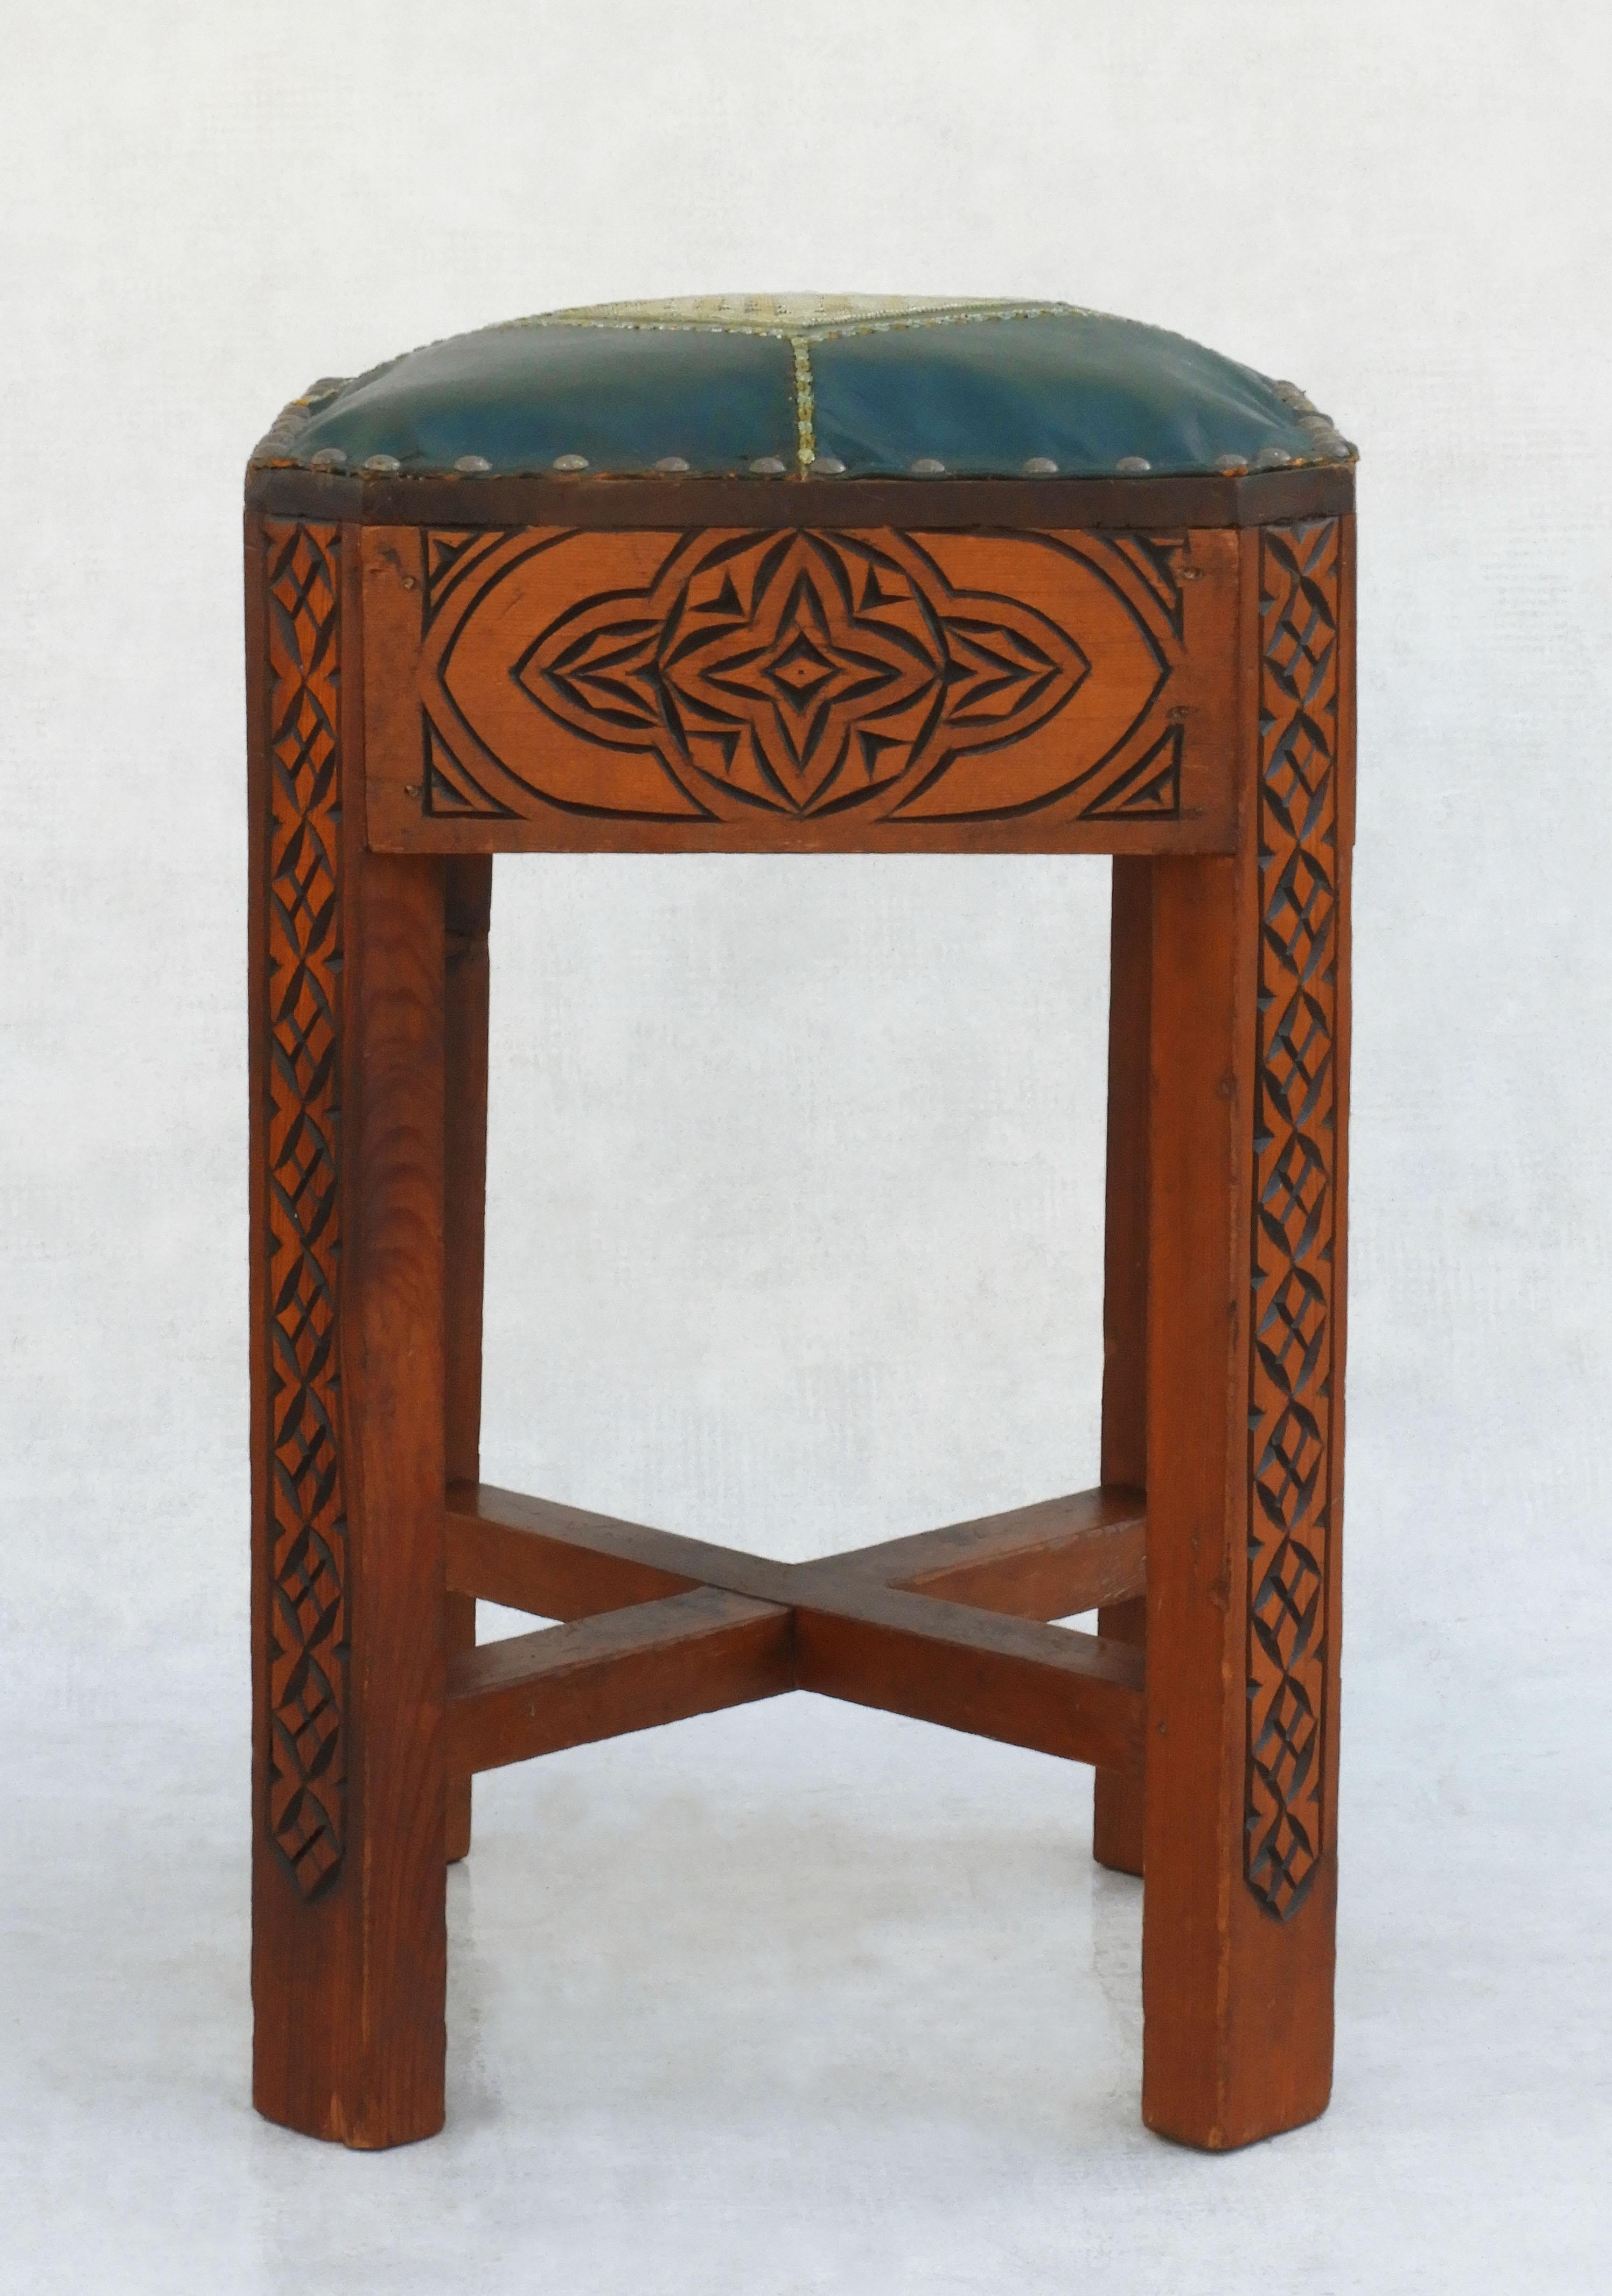 Hand-Carved Moorish Style Tabouret Stools Hand Carved Wood and Embroidered Leather C1950s For Sale